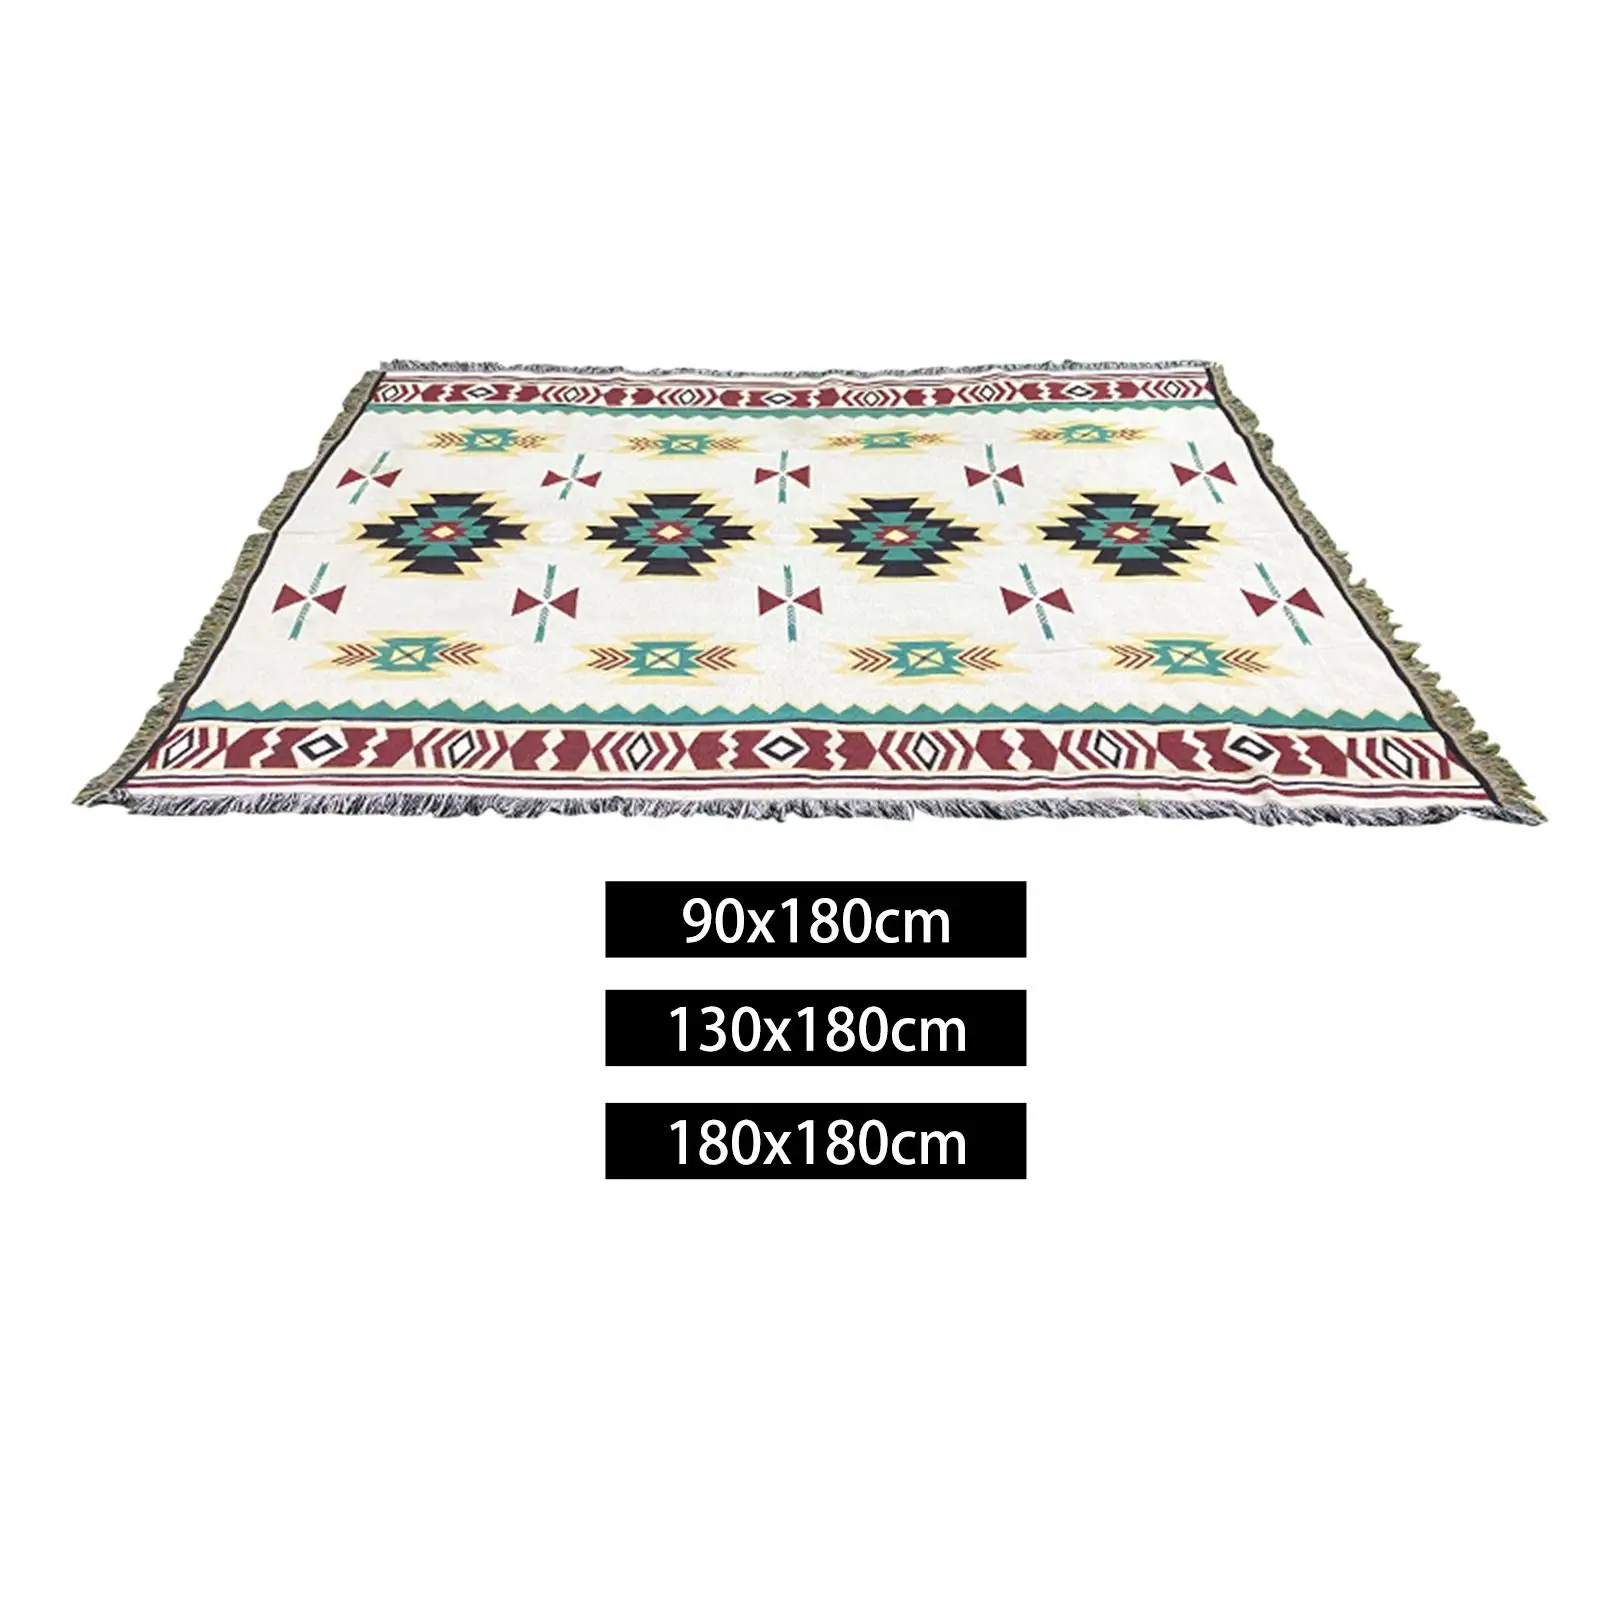 Picnic Mat Bed Skirt Reusable Casual Carpet for Indoor, Outdoor Picnic,